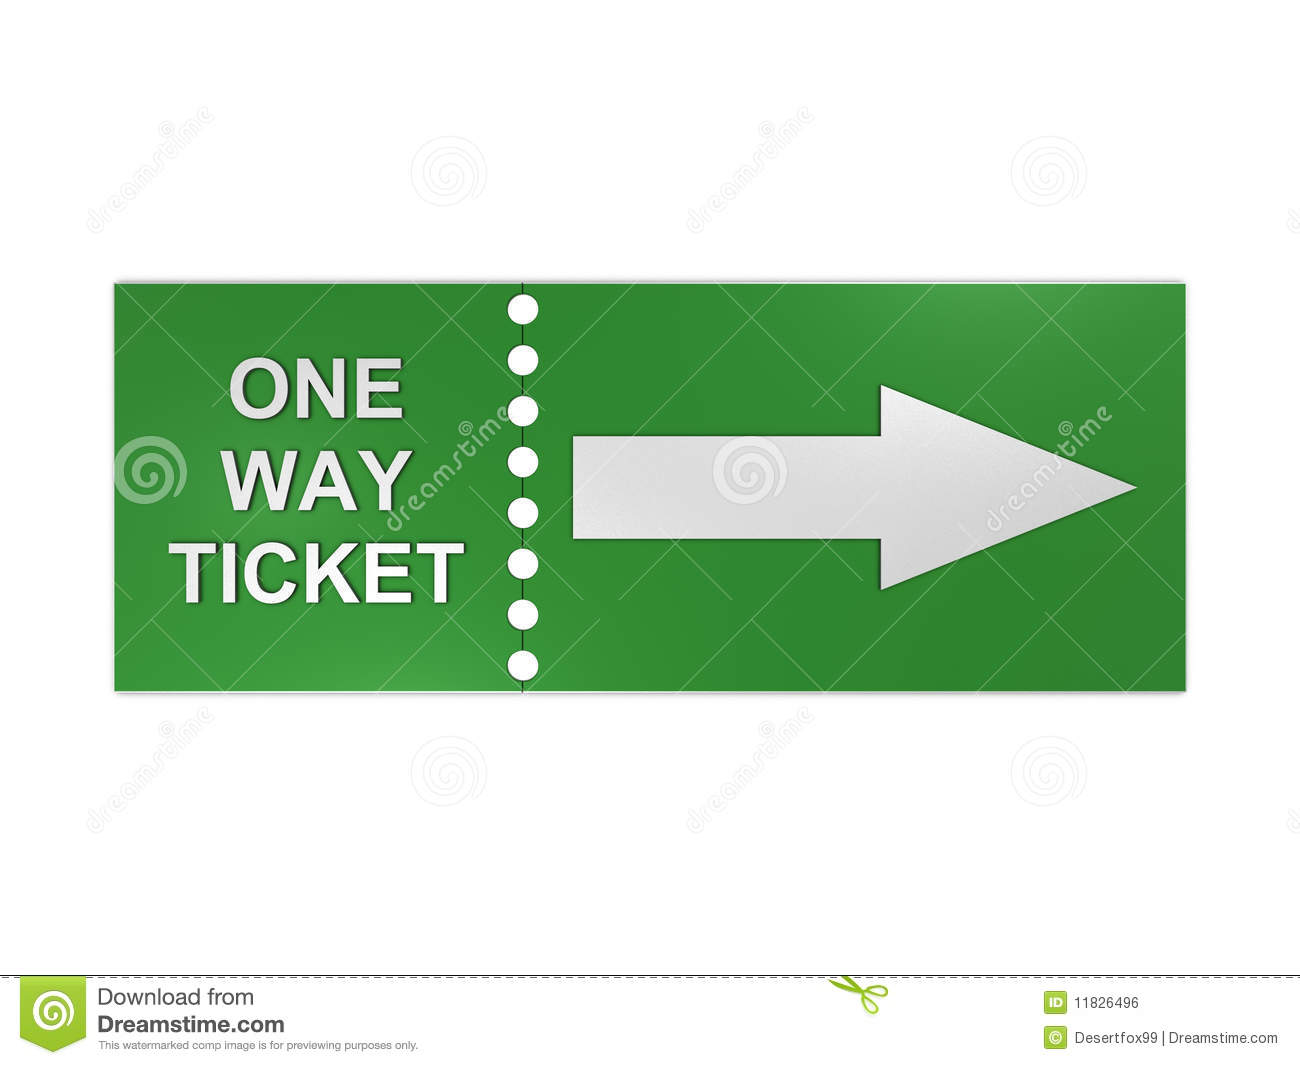 One Way Ticket Royalty Free Stock Image   Image  11826496